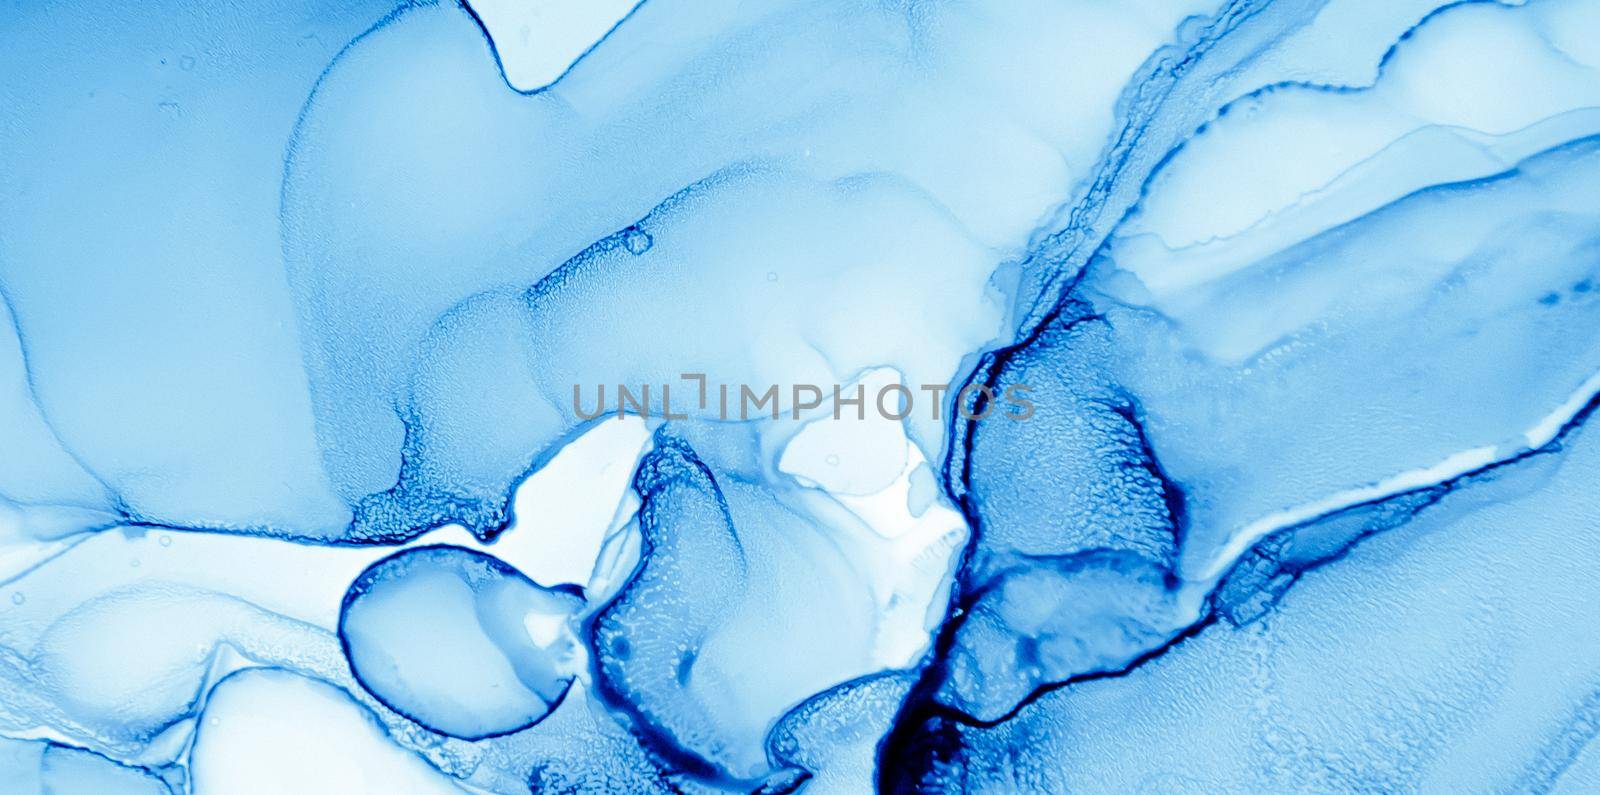 Ink Colours Mix. Oil Flow Wallpaper. Blue Alcohol Effect. Ink Colours Mix Water. Watercolor Modern Drops. Snow Light Print. Indigo Fluid Painting. Art Abstract Pattern. Marble Mixing Inks.